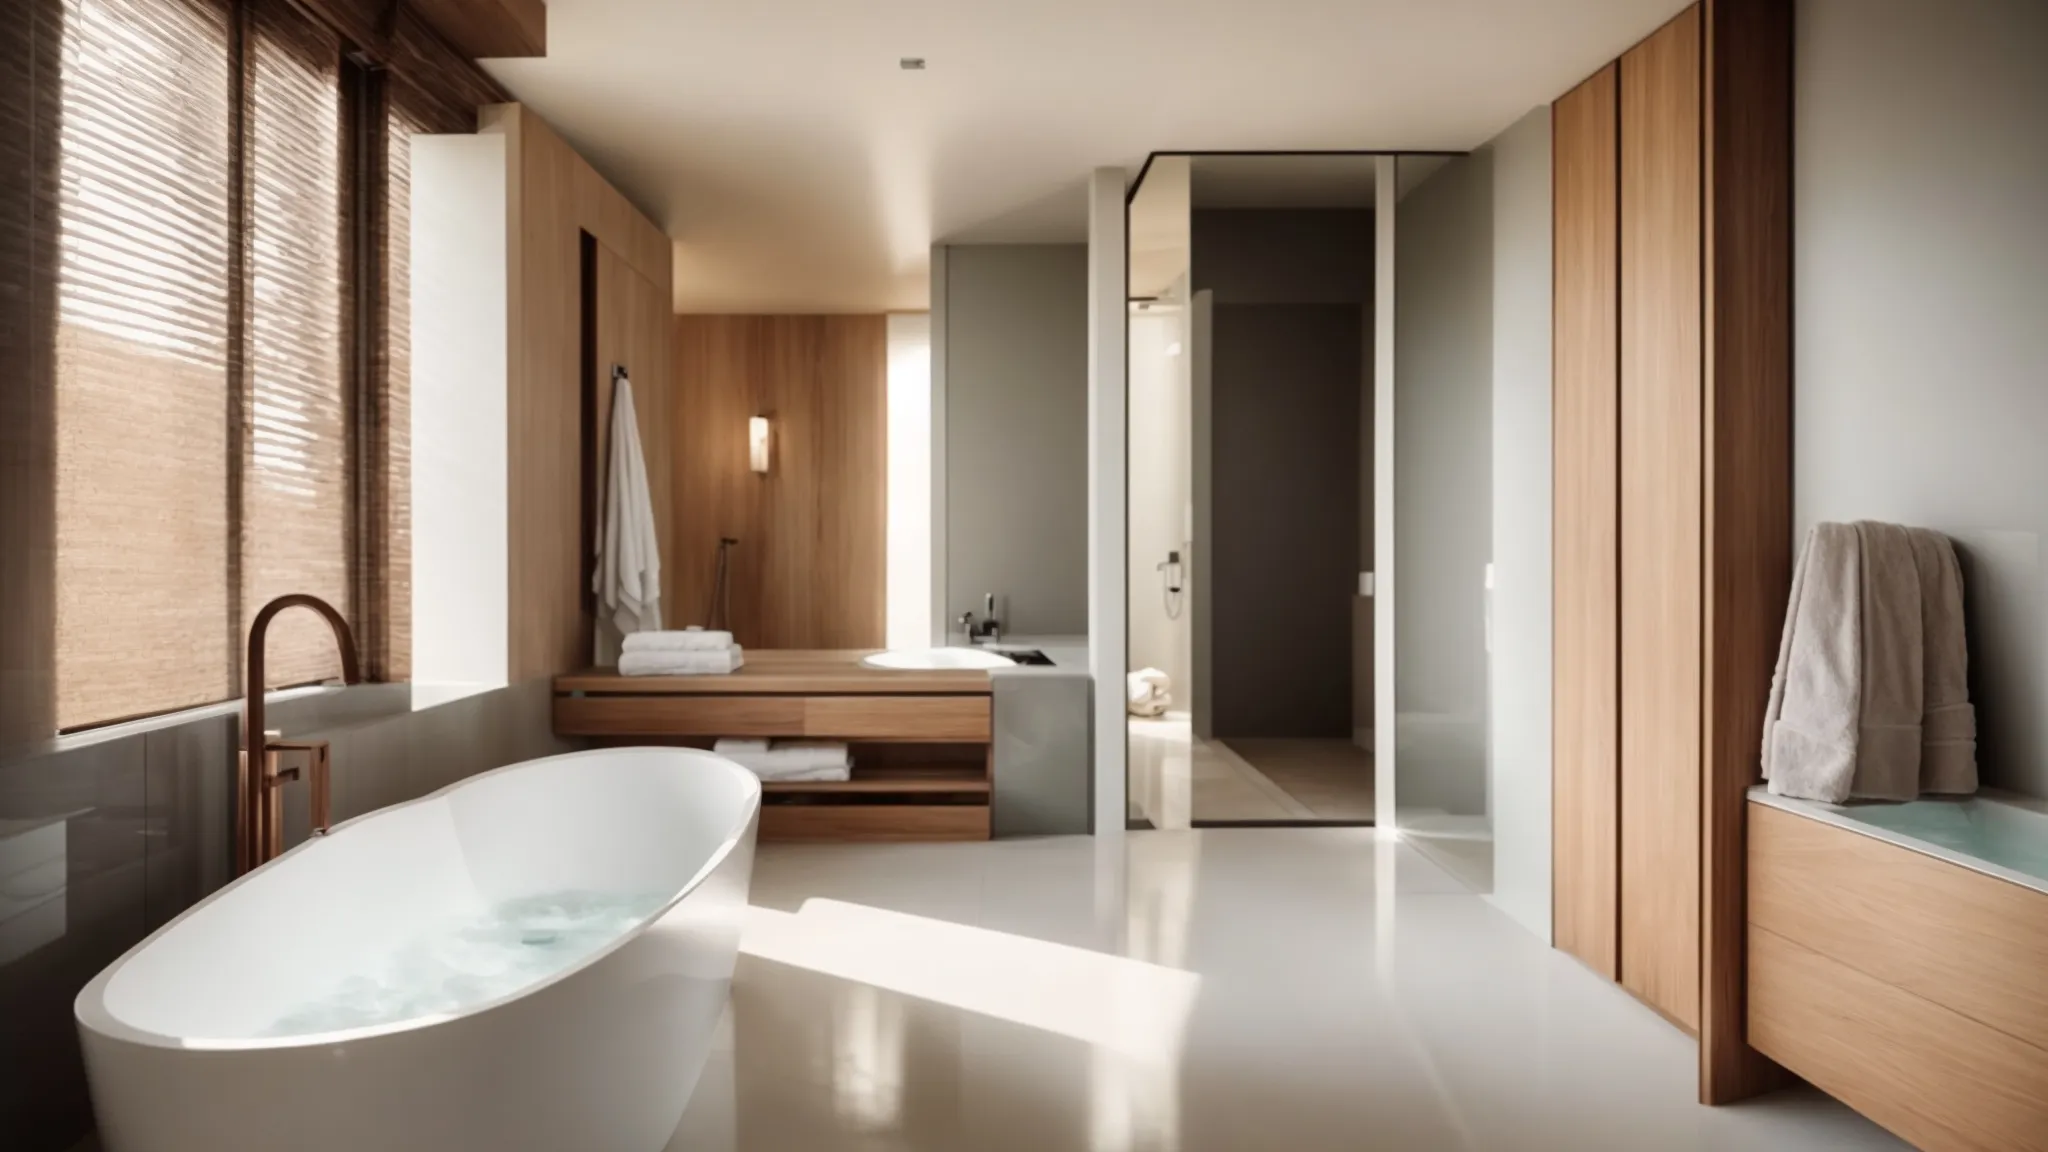 a luxurious free standing bathtub sits prominently in a spacious, minimalist bathroom, illuminated by natural light.